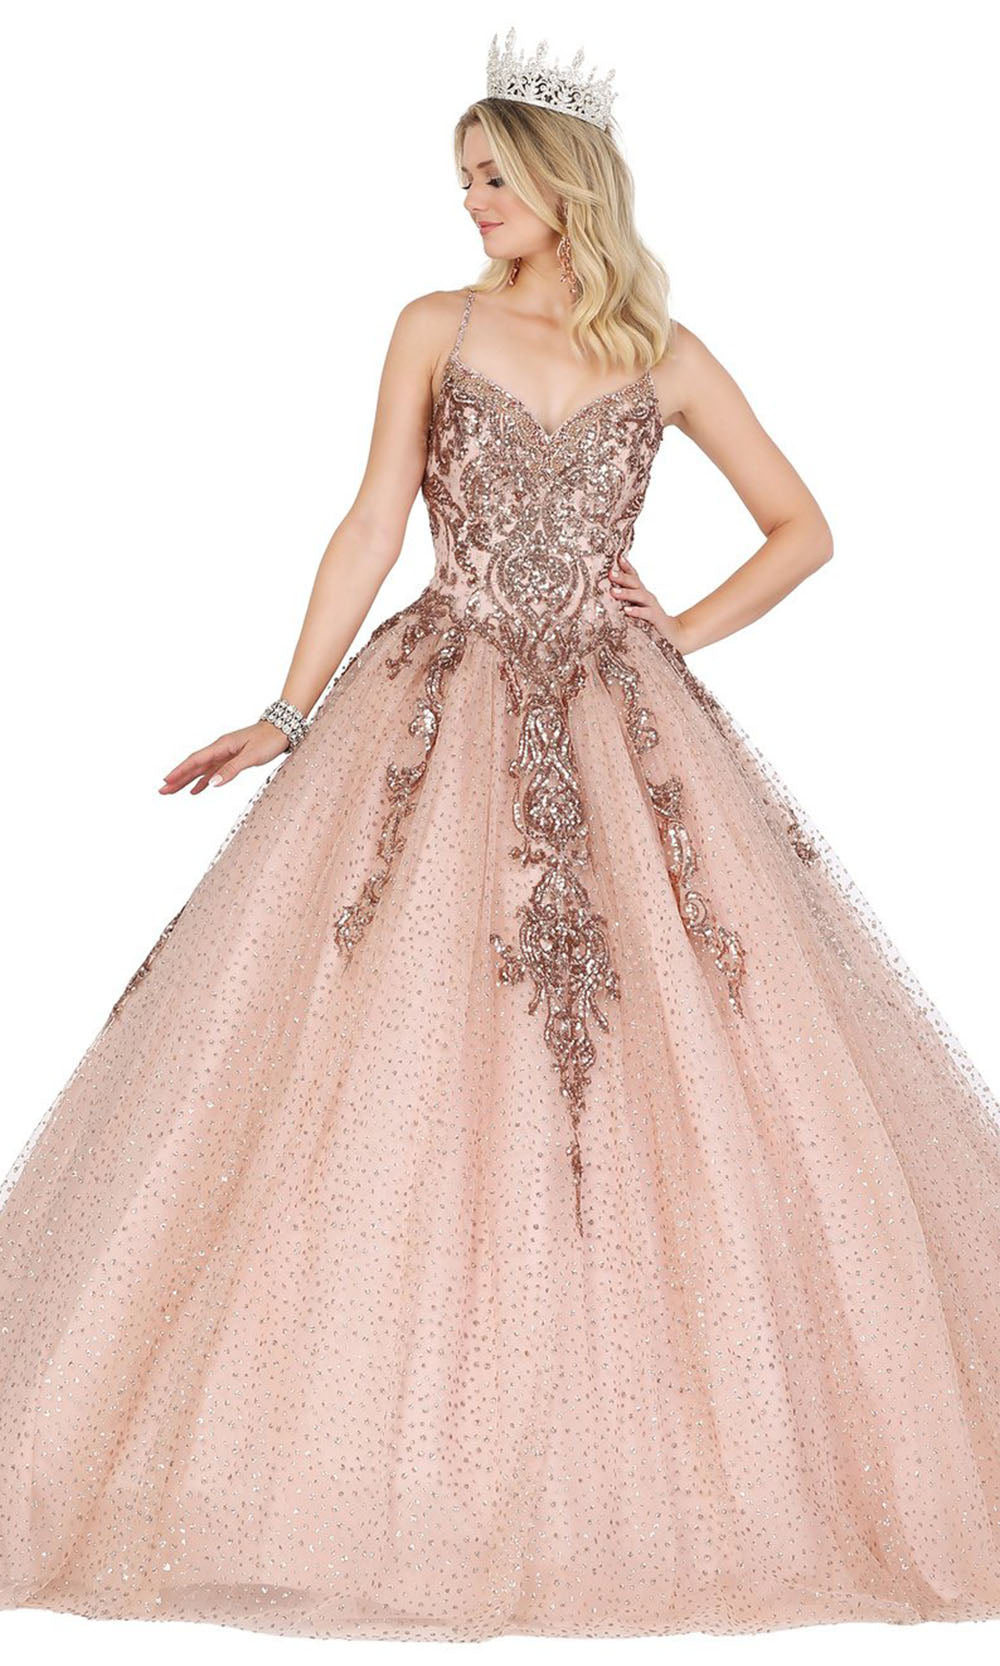 Dancing Queen - 1437 Thin Strapped Sequined Ballgown In Pink and Gold